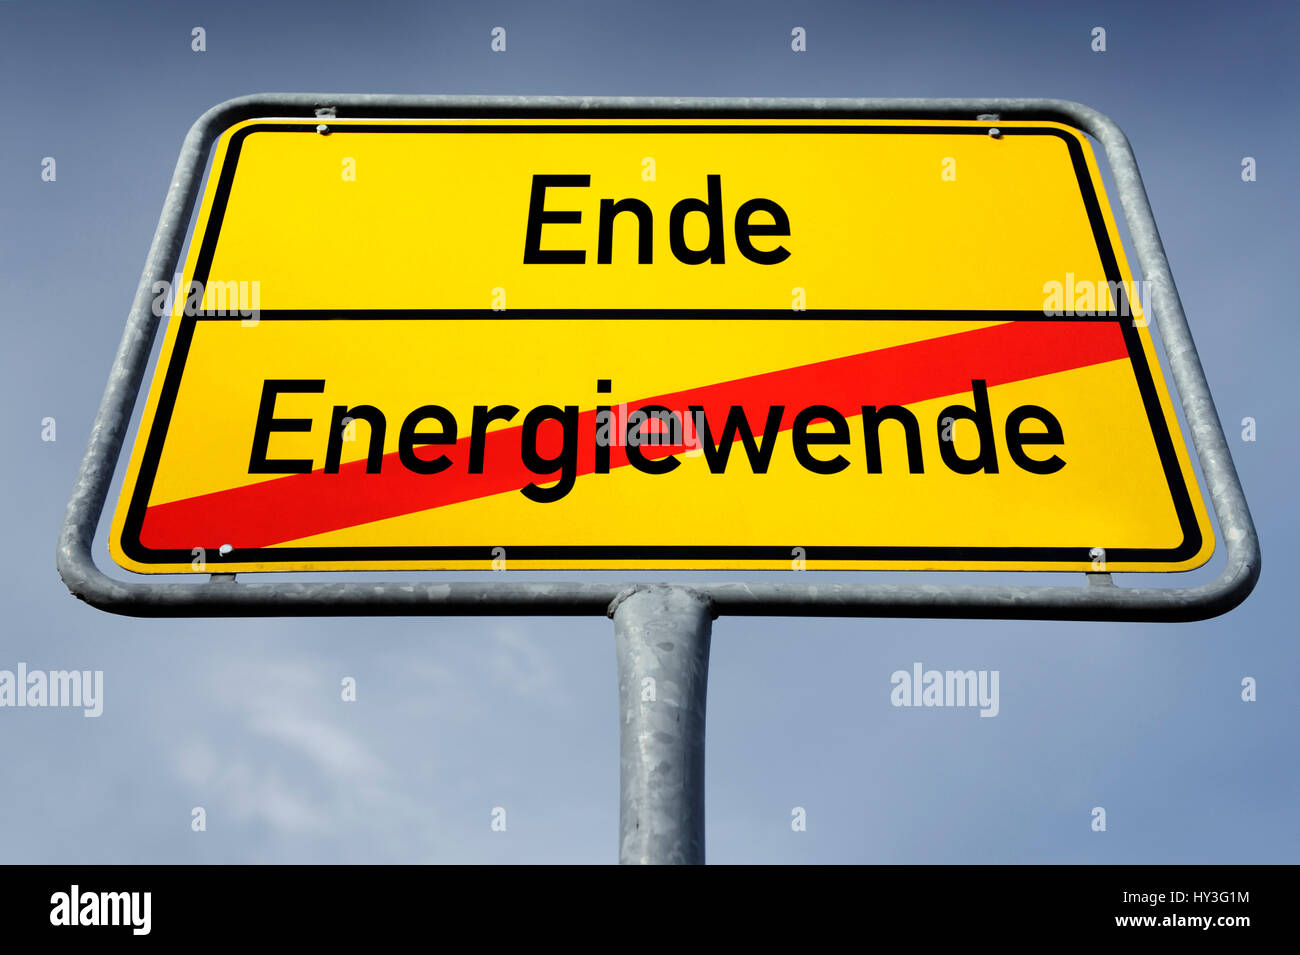 Local sign Energy turn and End, Difficulties with the conversion of the energy turn, Ortsschild Energiewende und Ende, Schwierigkeiten bei der Umsetzu Stock Photo